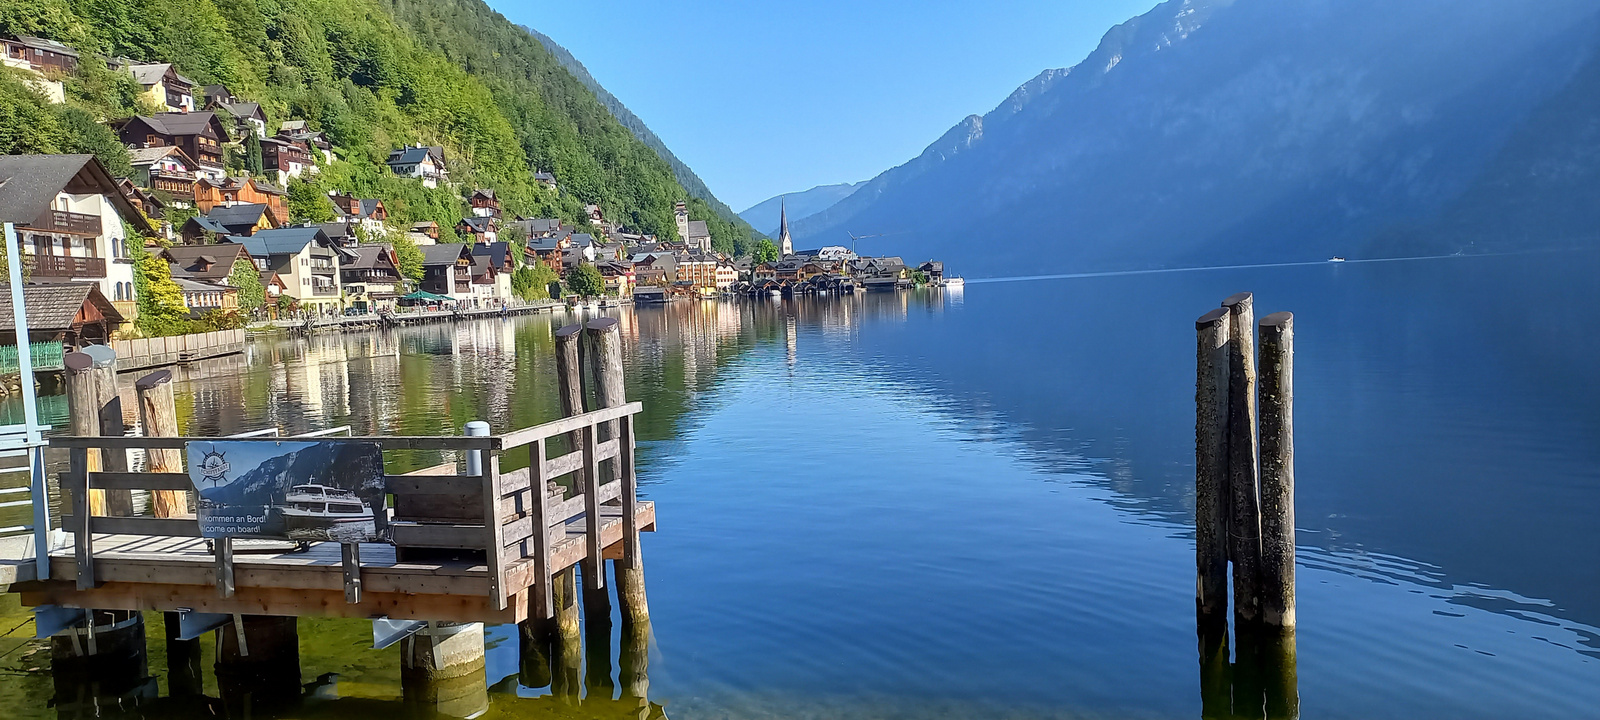 066a - Hallstatter See